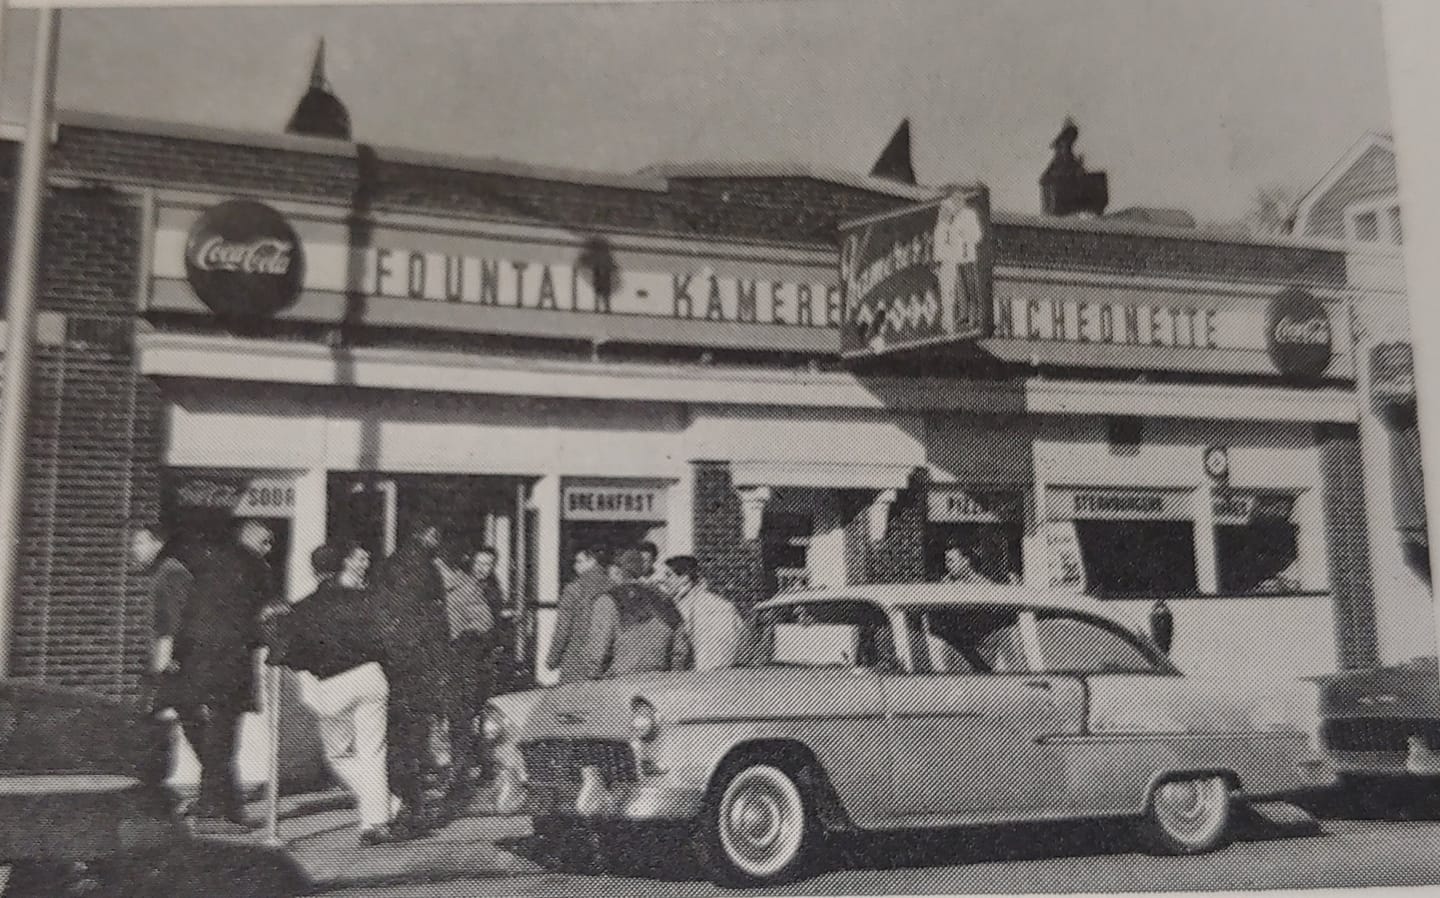 A black and white photo of the front of a luncheonette. There is a 1950s style car parked in front, and several people milling around outside.